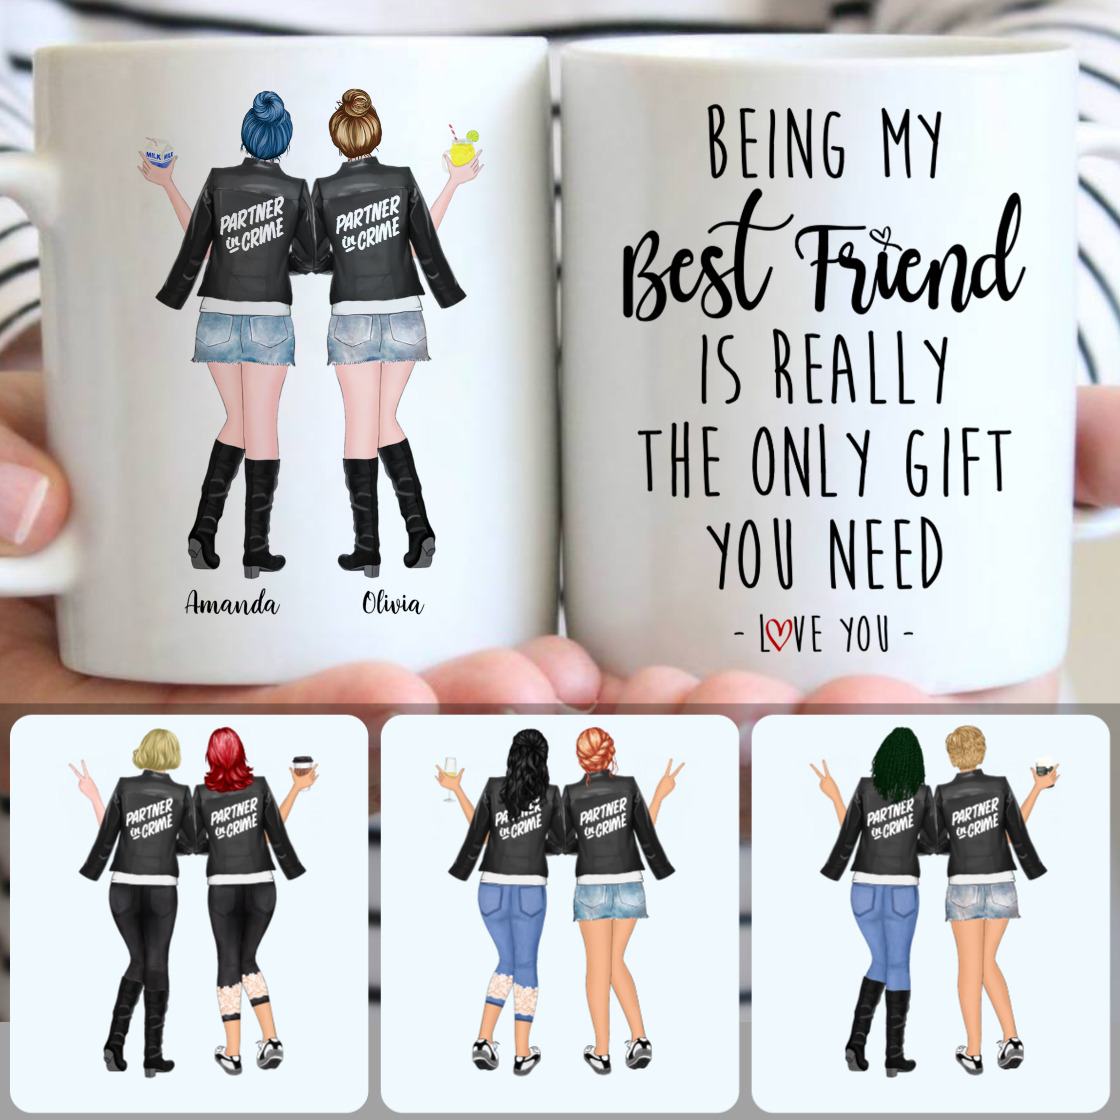 Personalized Mug, Unique Birthday Gifts, 2 Besties - Parter In Crime Customized Coffee Mug With Names